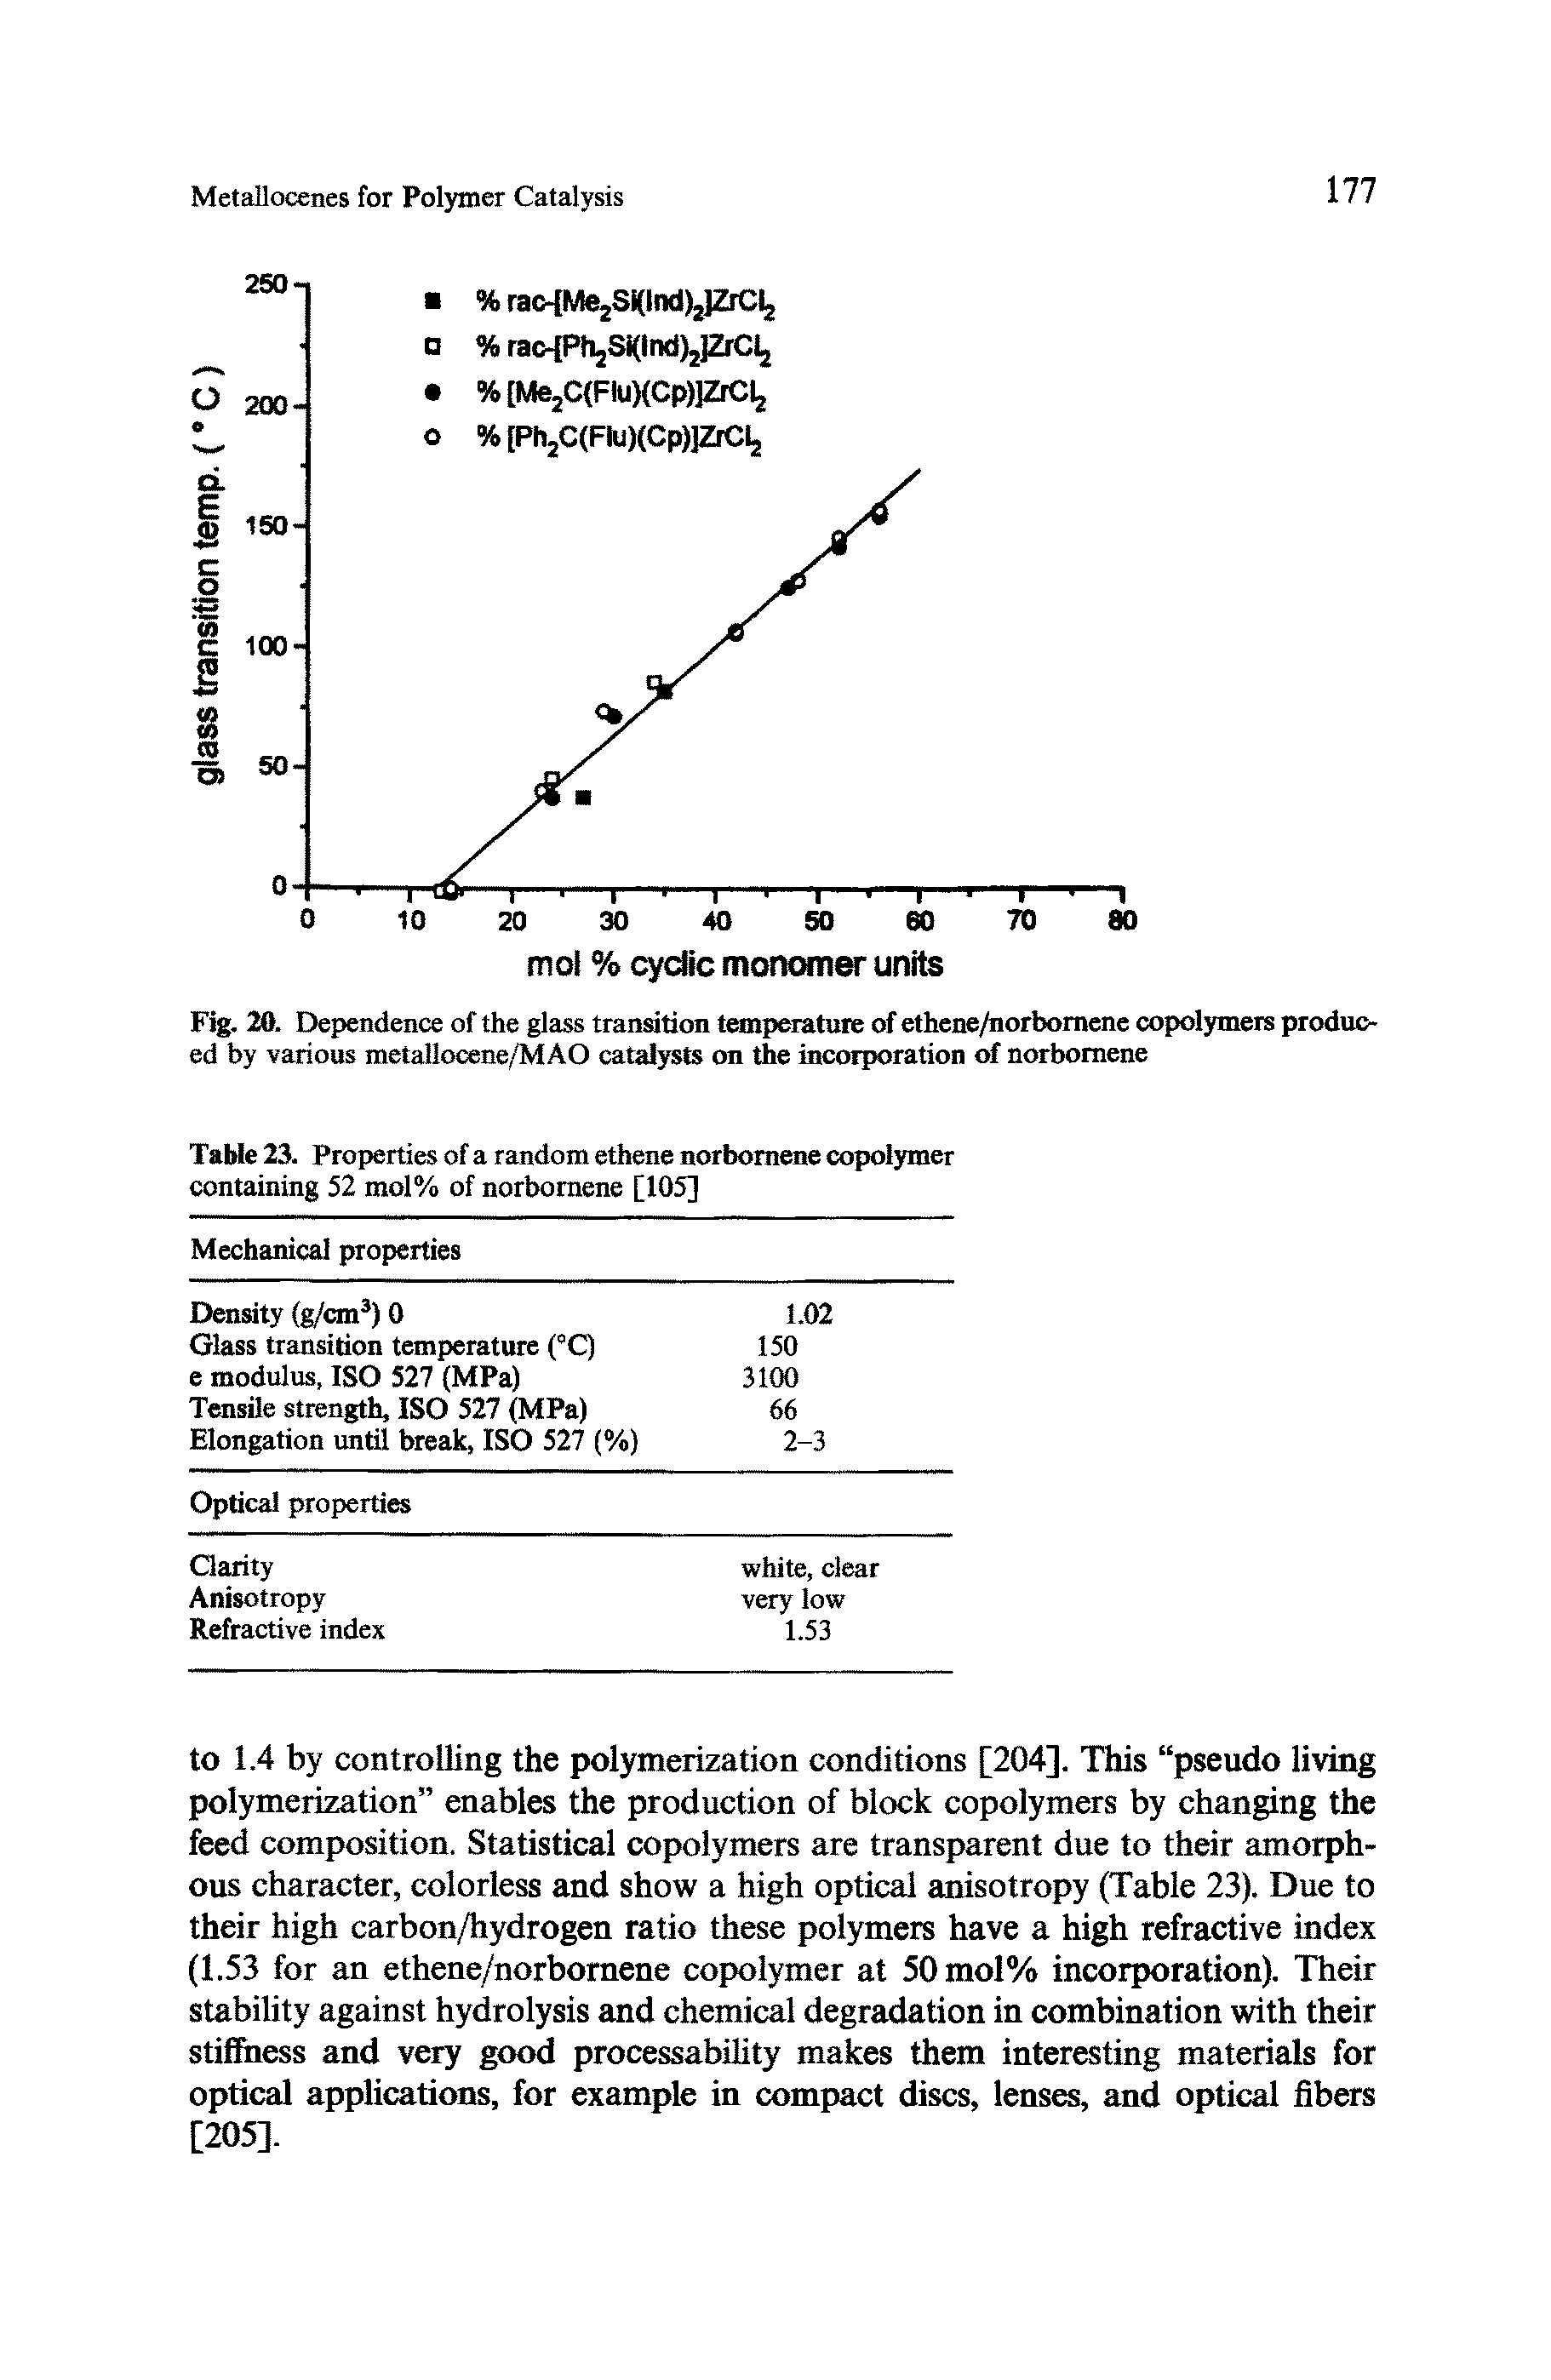 Table 23. Properties of a random ethene norbomene copolymer containing 52 mol% of norbomene [105]...